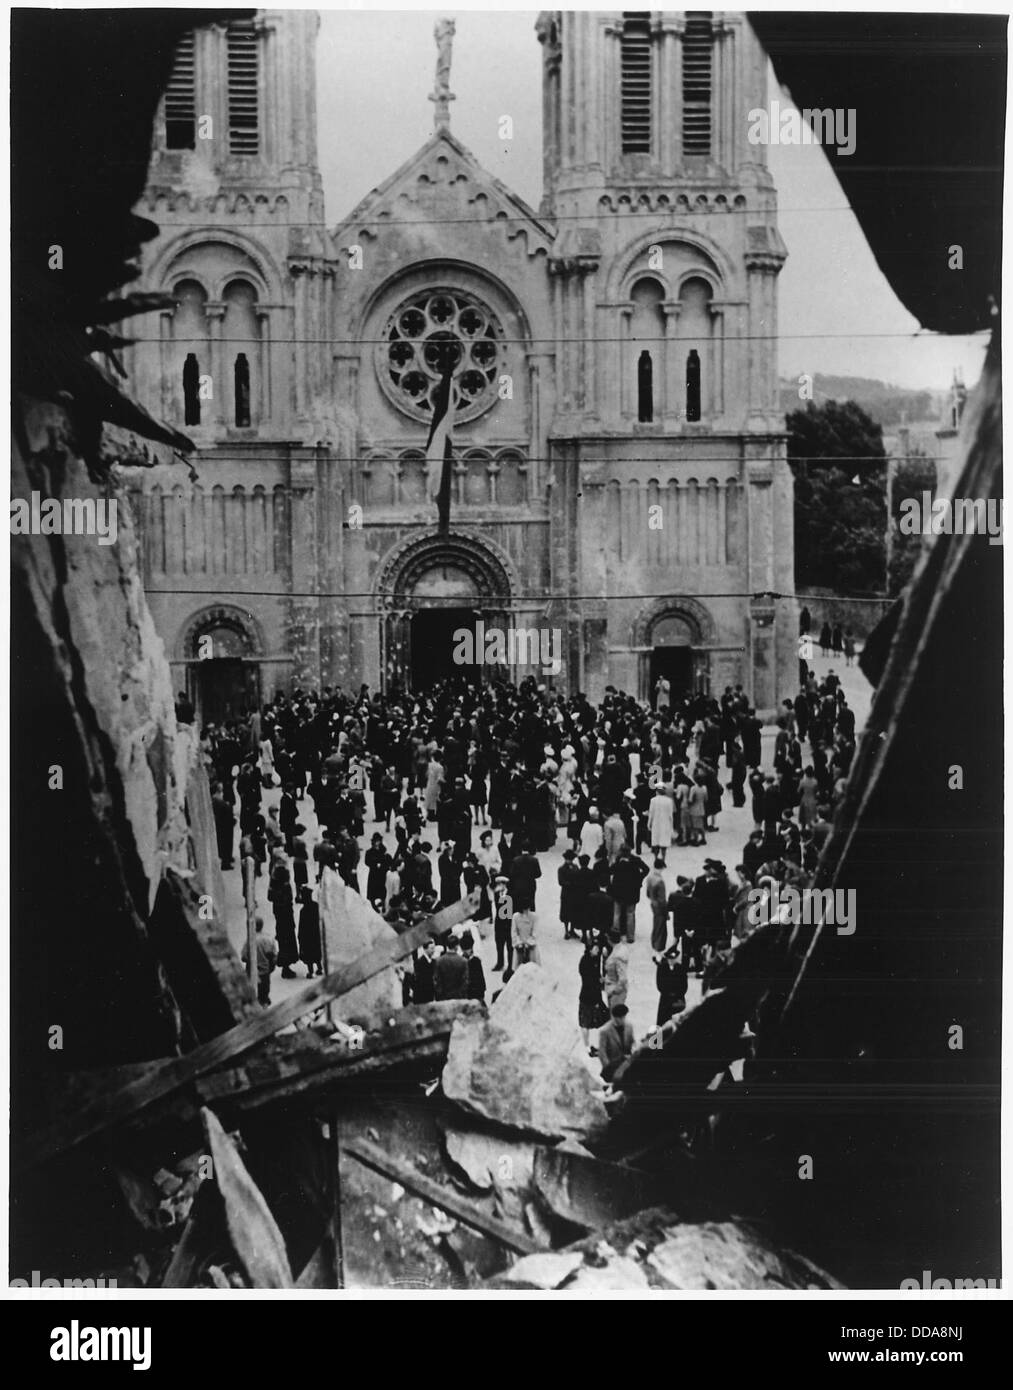 WWII, Europe, Cherbourg, France, Civilians, Scene from ruins of Notre Dame des Voeux. - - 196290 Stock Photo